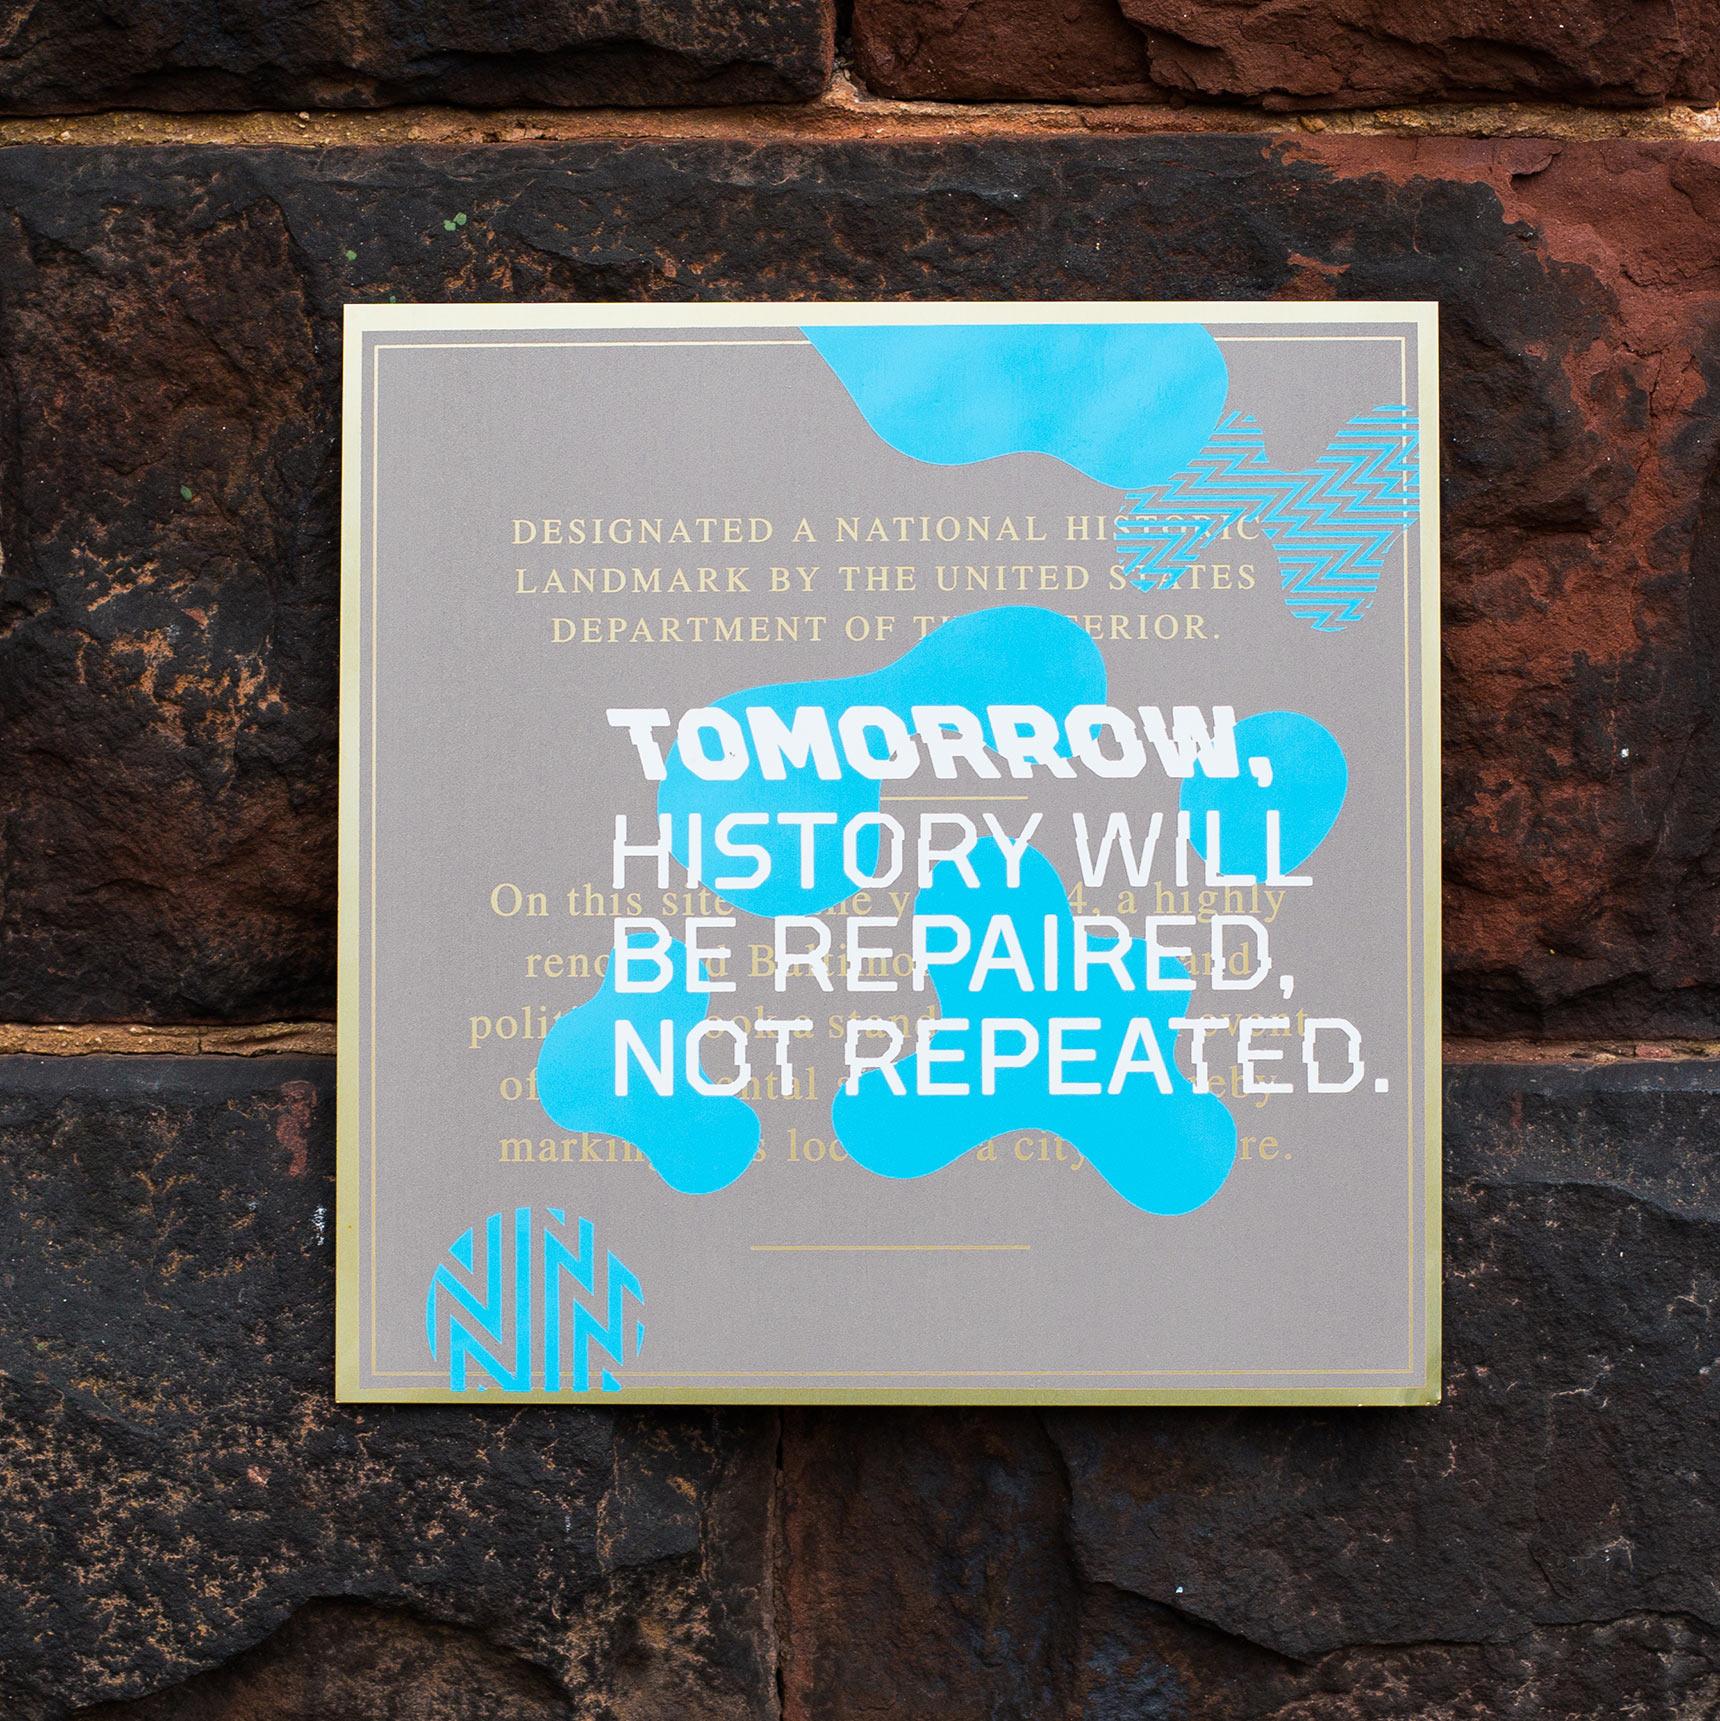 Tomorrow, history will be repaired, not repeated. A disrupted historic marker public art detournement